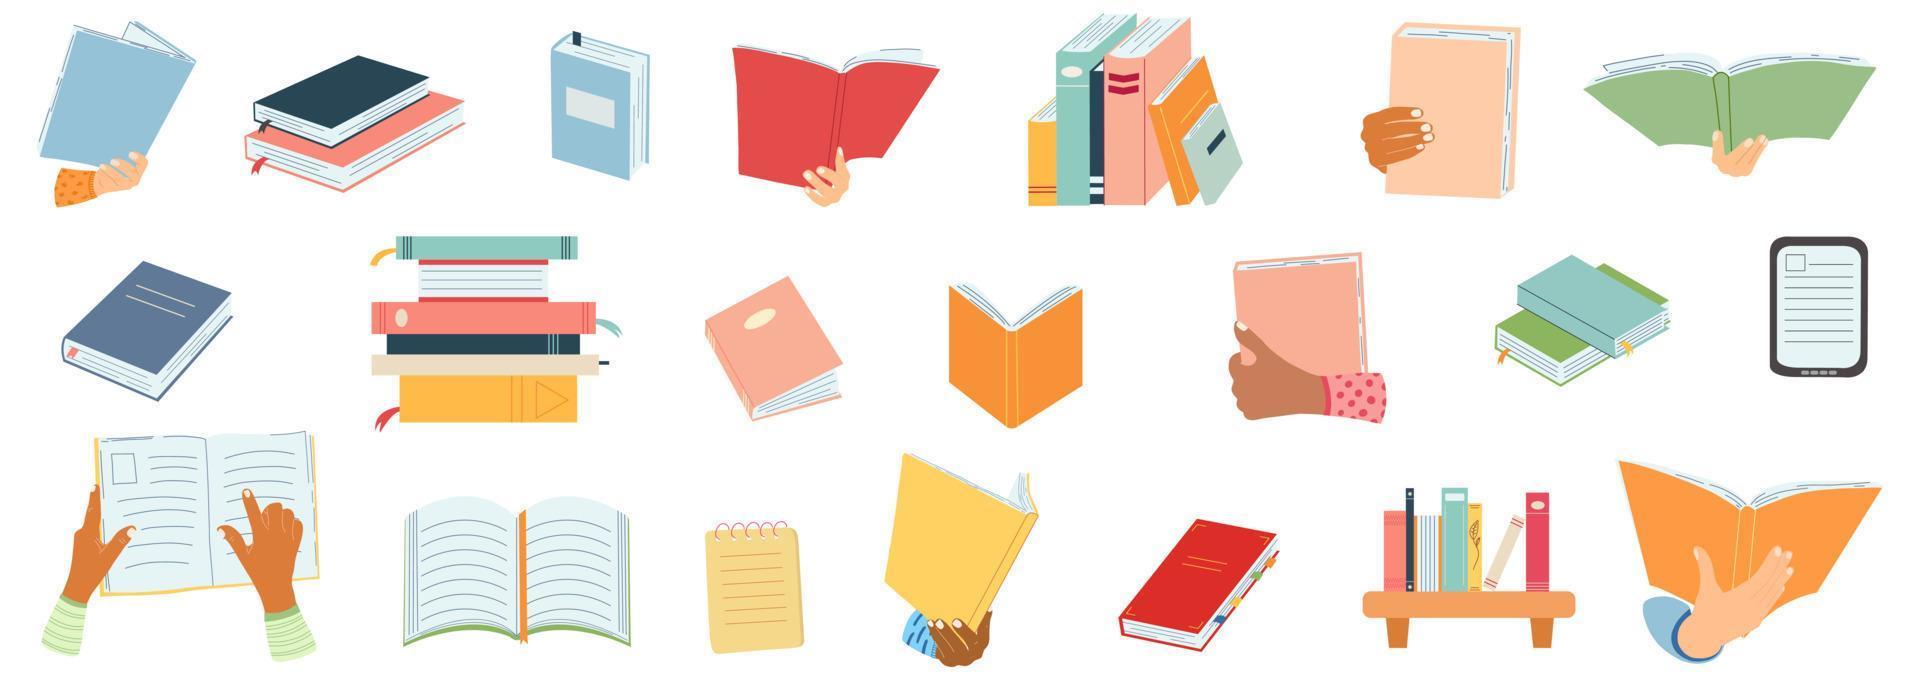 World book day concept, studying, learning. Stack of books in cartoon flat style. Vector illustration of hand drawn educational, encyclopedias, planner.